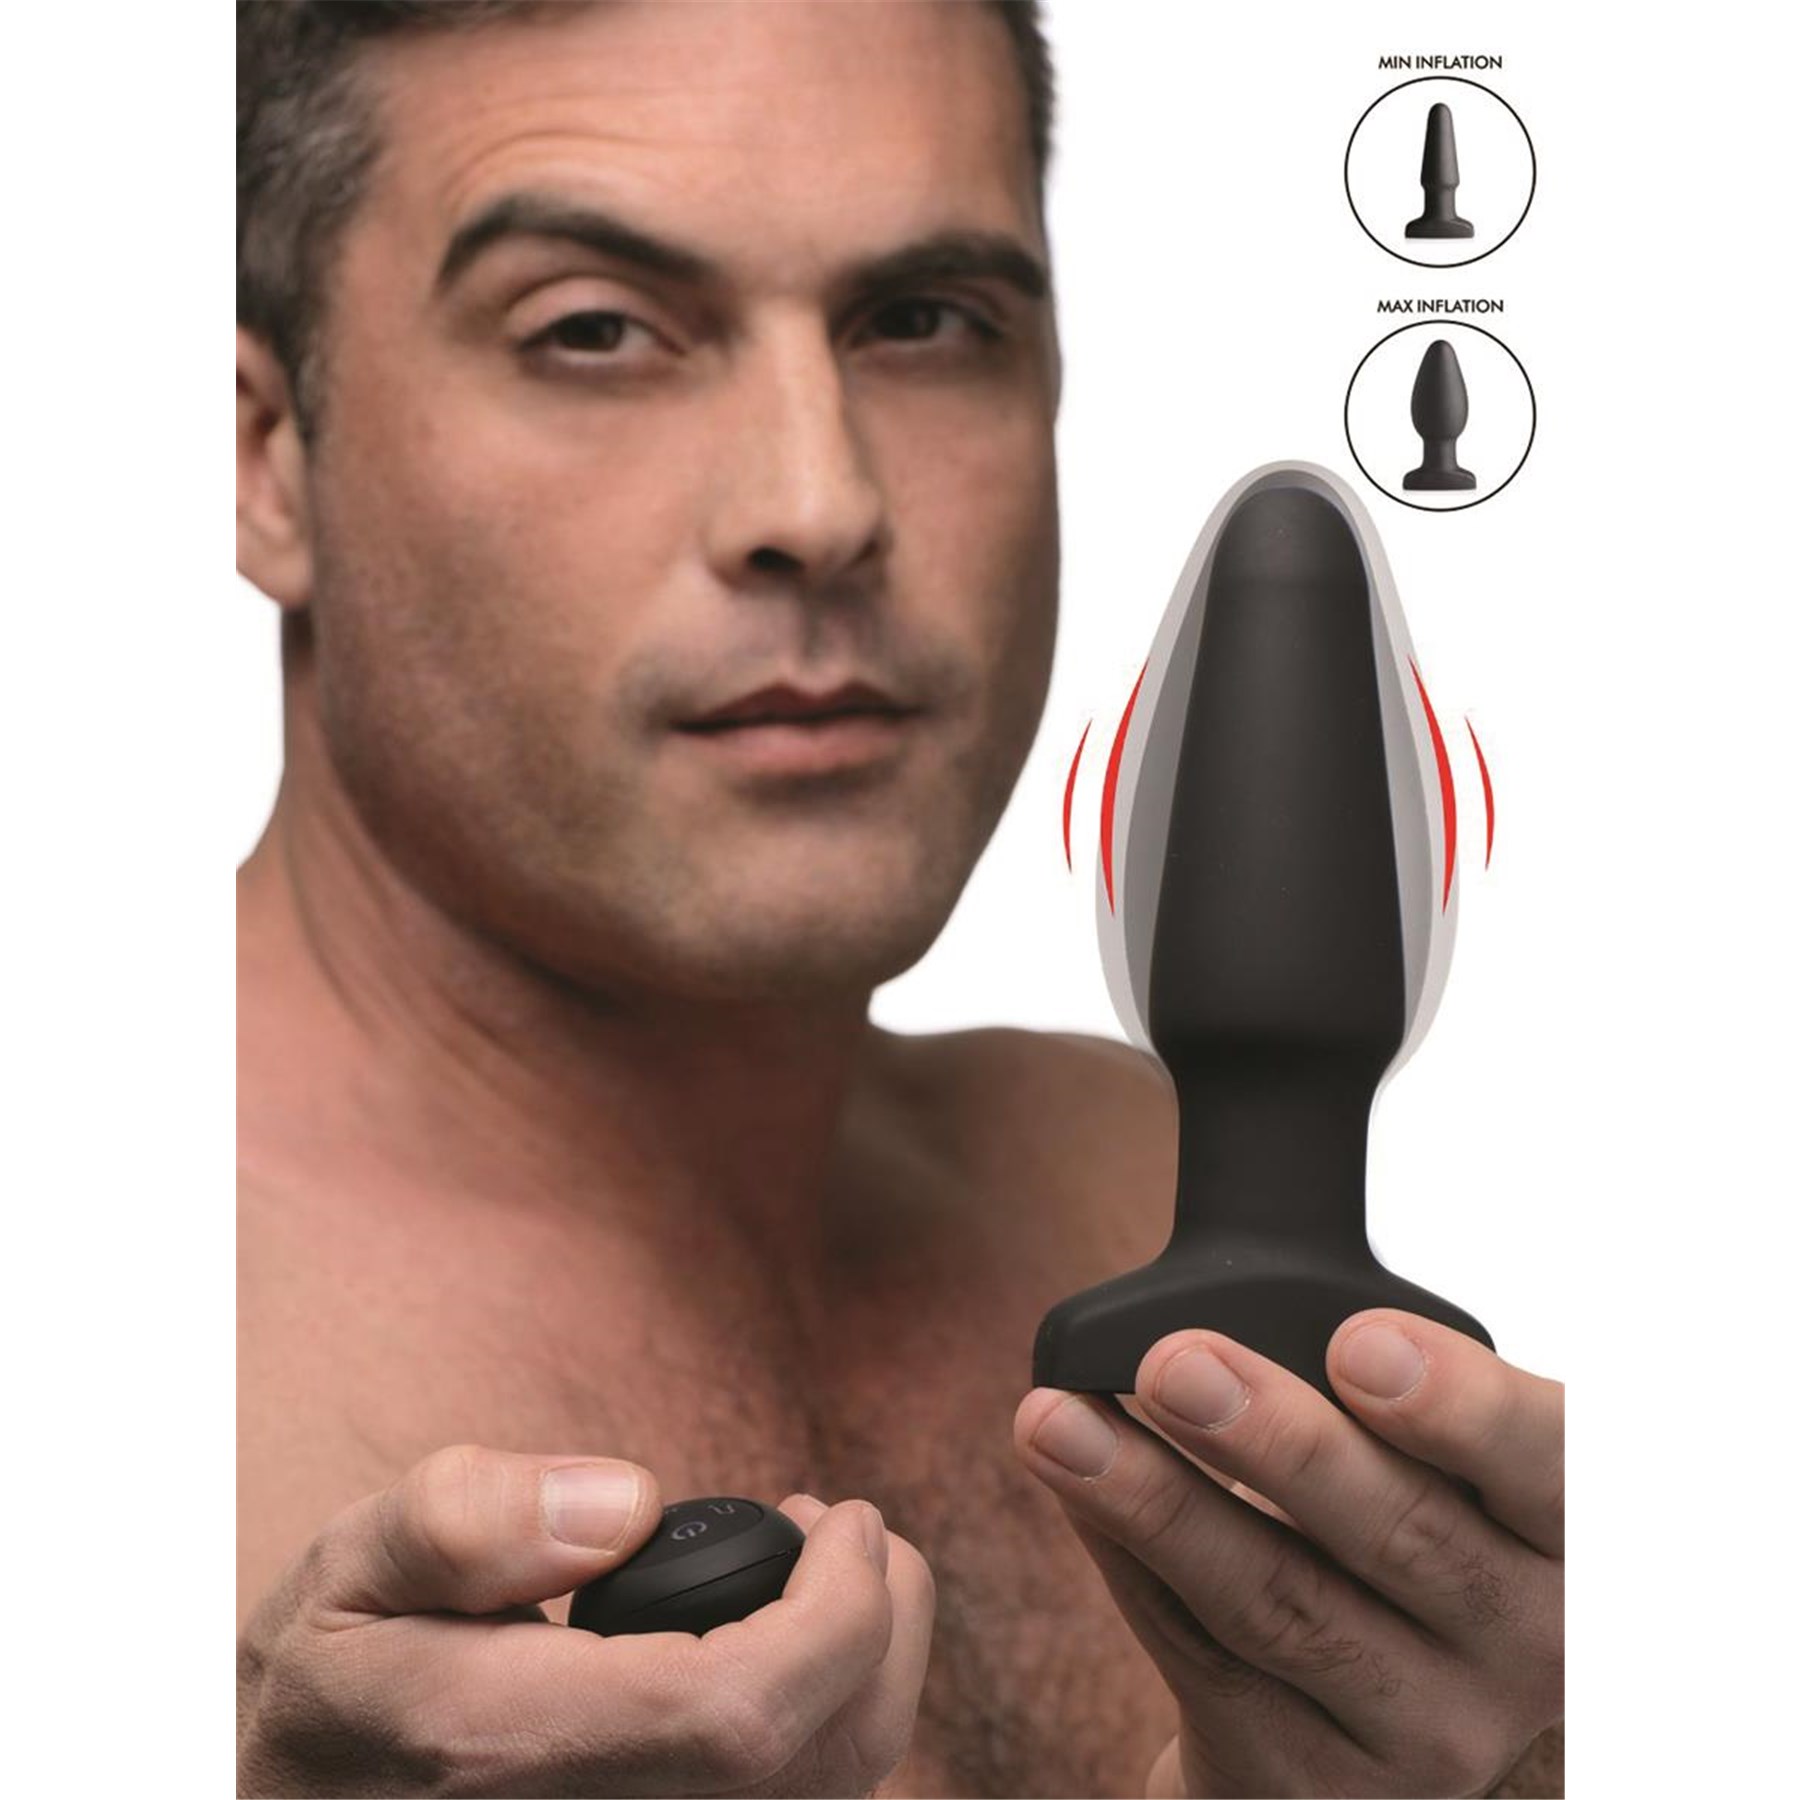 Swell 10X Vibrating Butt Plug held by male